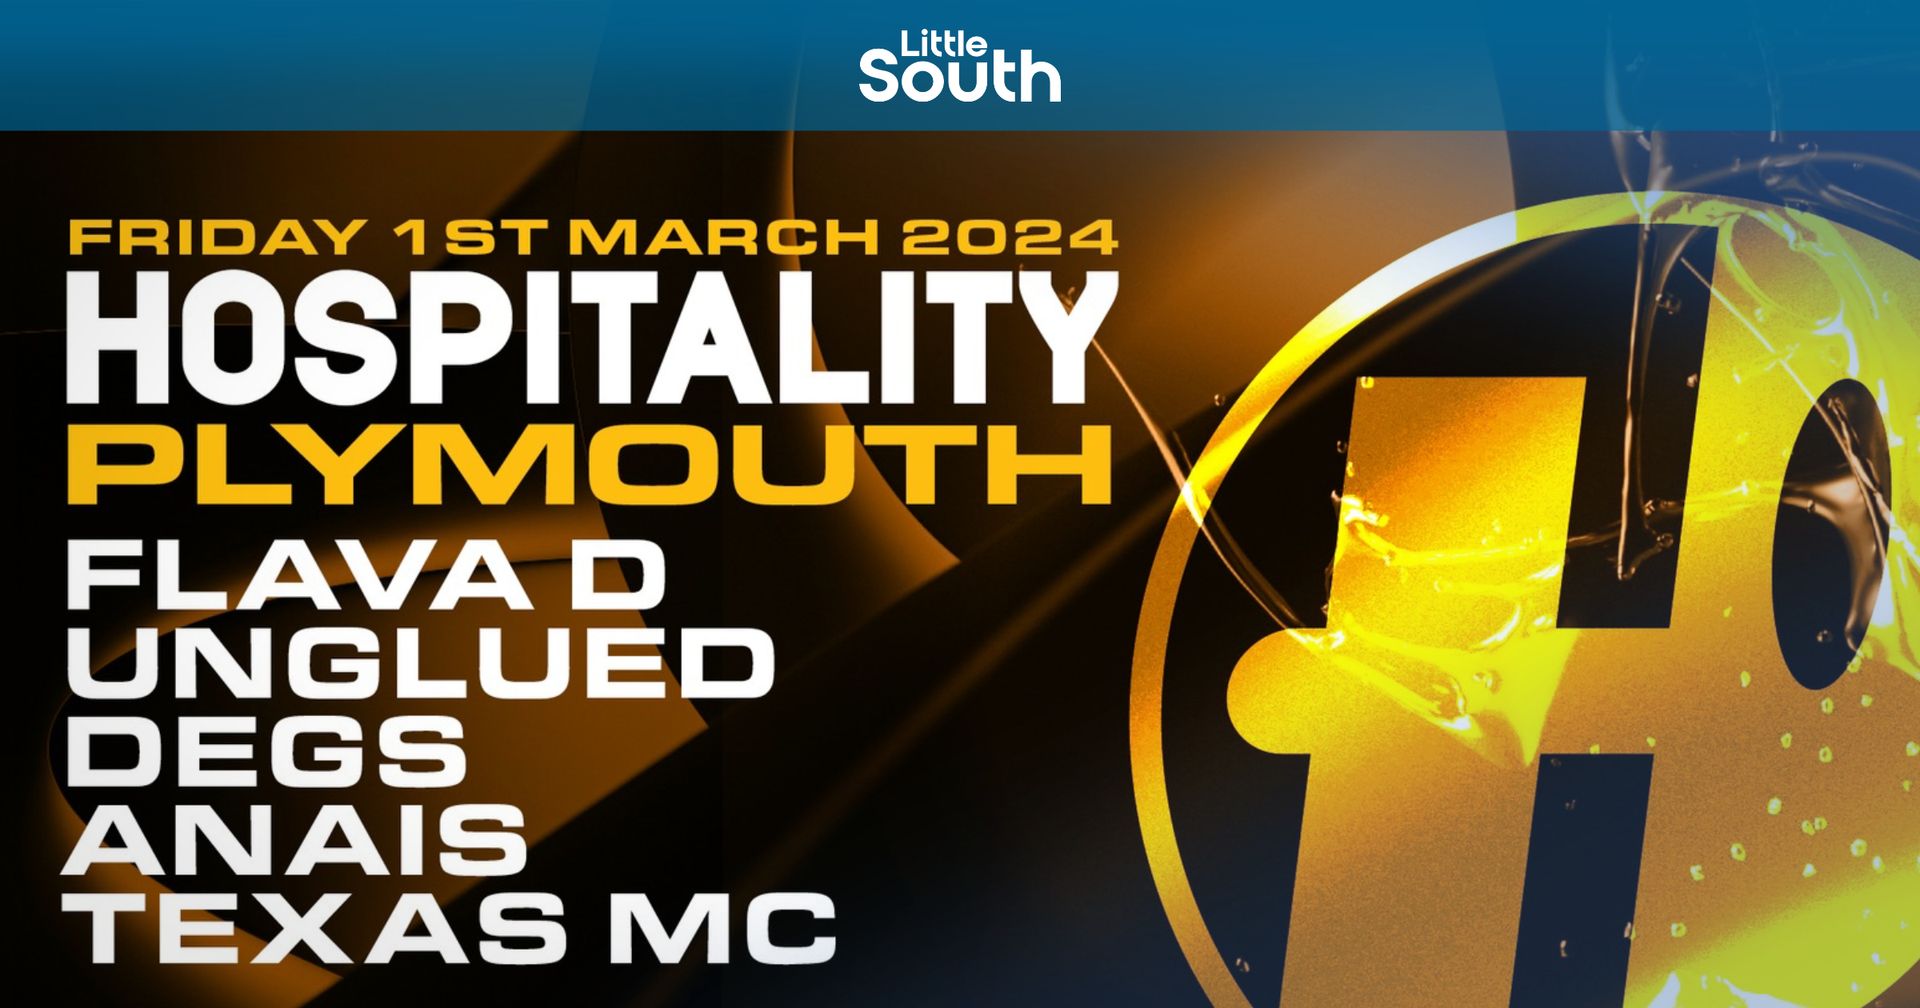 a poster for hospitality plymouth on friday march 18th 2024